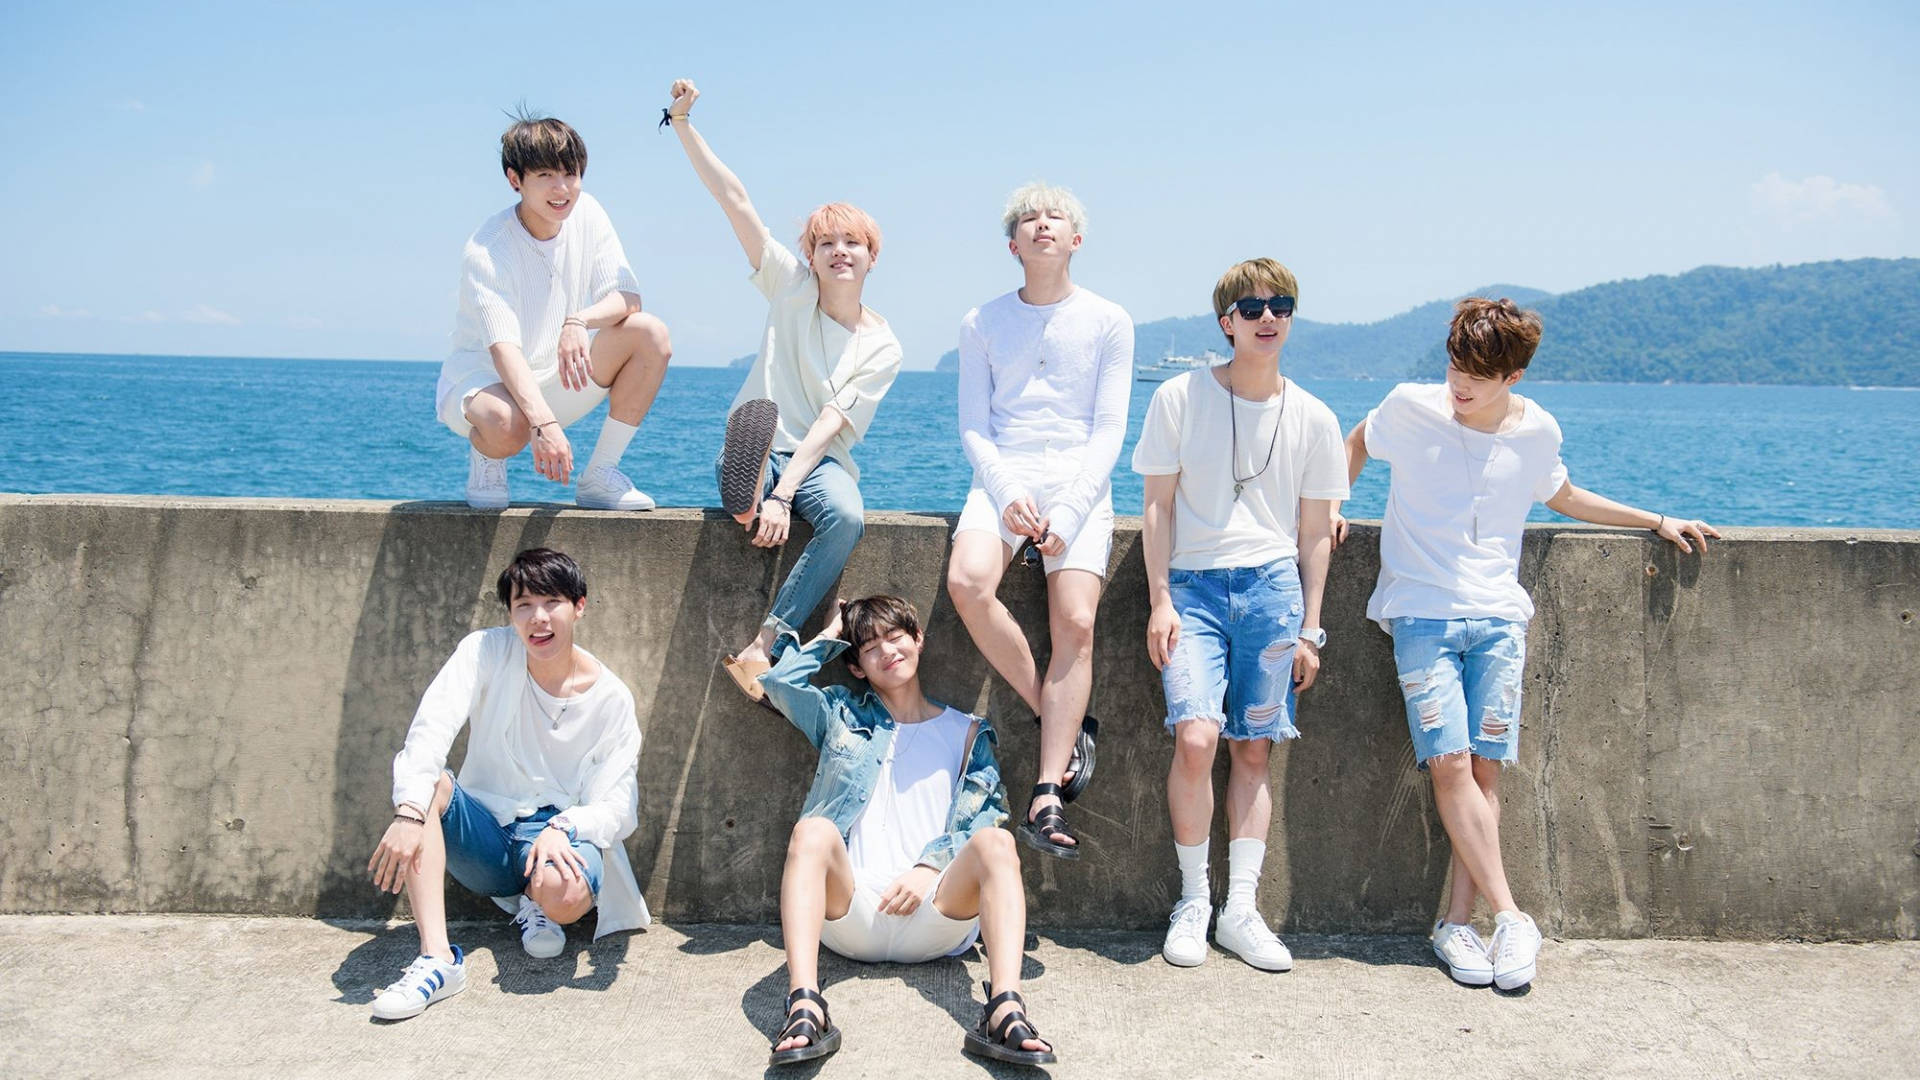 Top 999+ Bts Group Photo Wallpaper Full Hd, 4K✓Free To Use